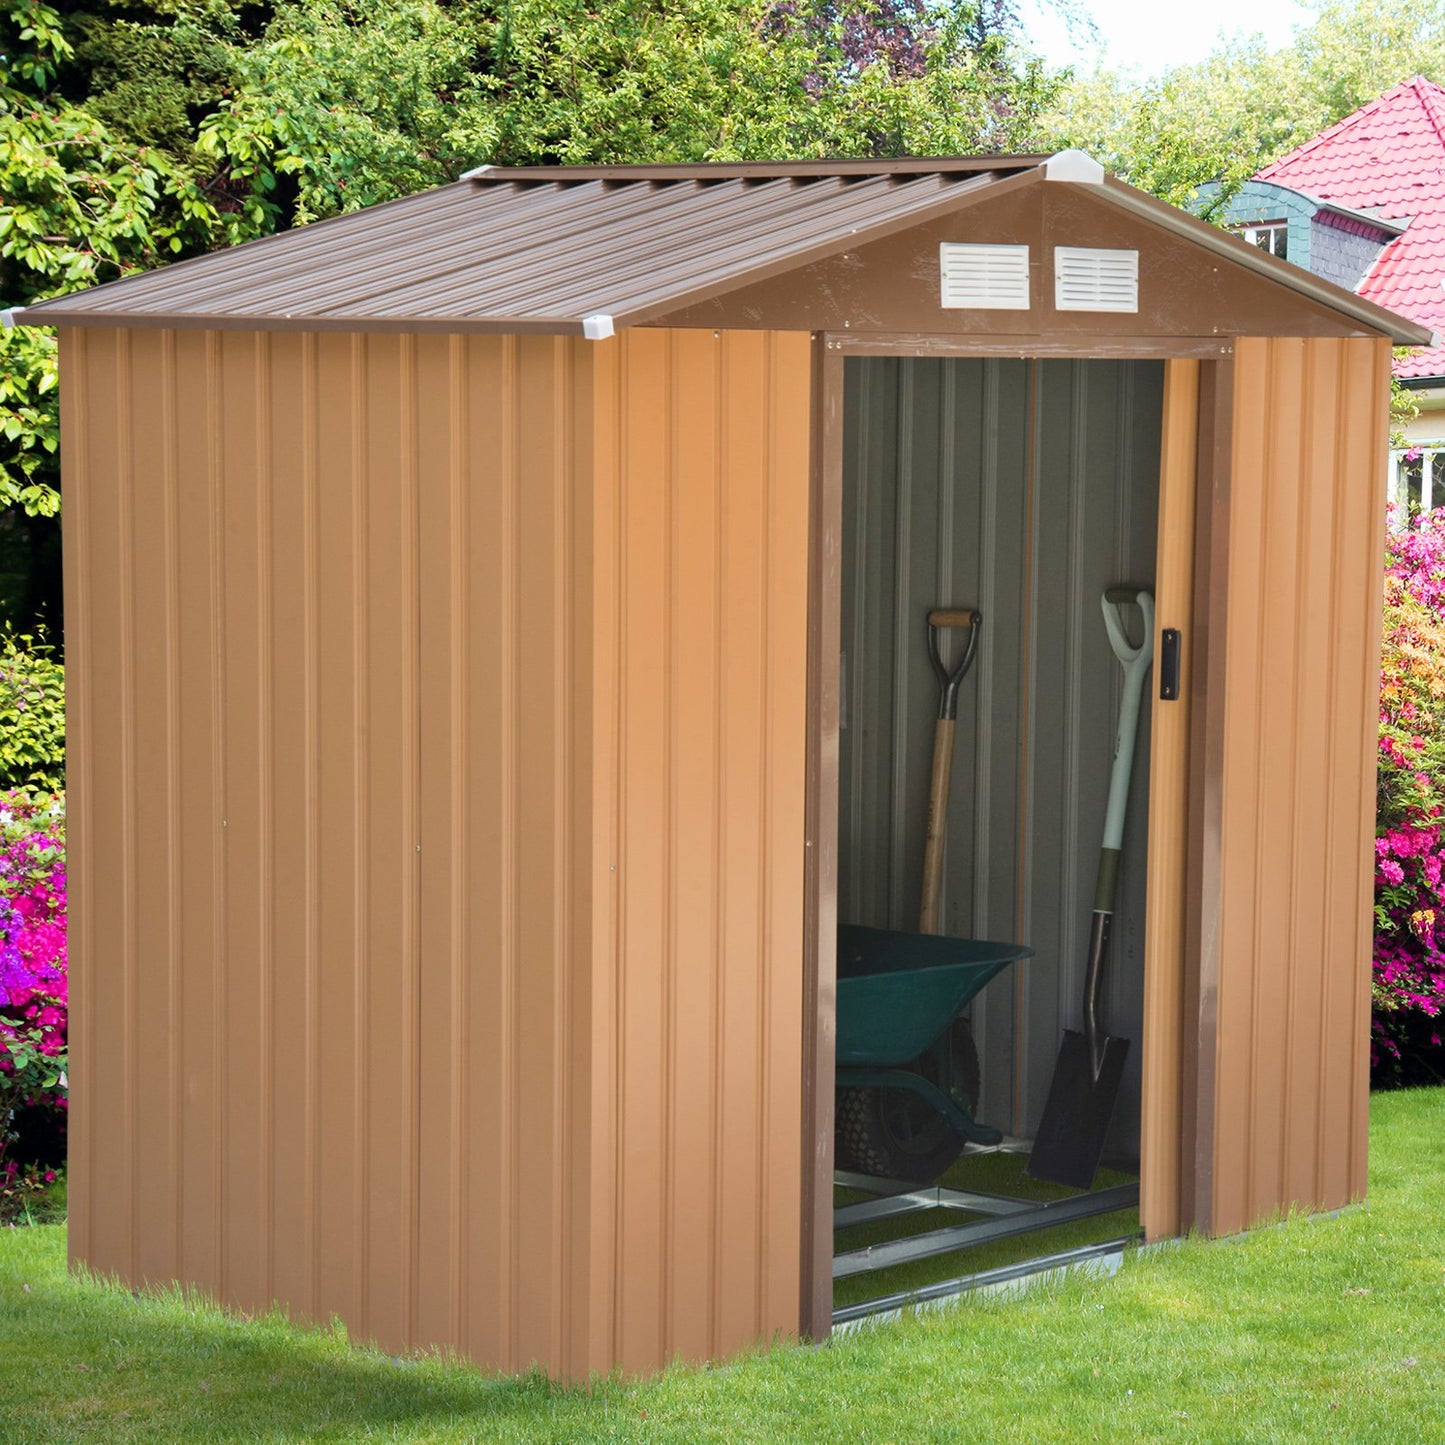 Outsunny 7 x 4ft Lockable Garden Shed Large Patio Roofed Tool Metal Storage Building Foundation Sheds - Khaki